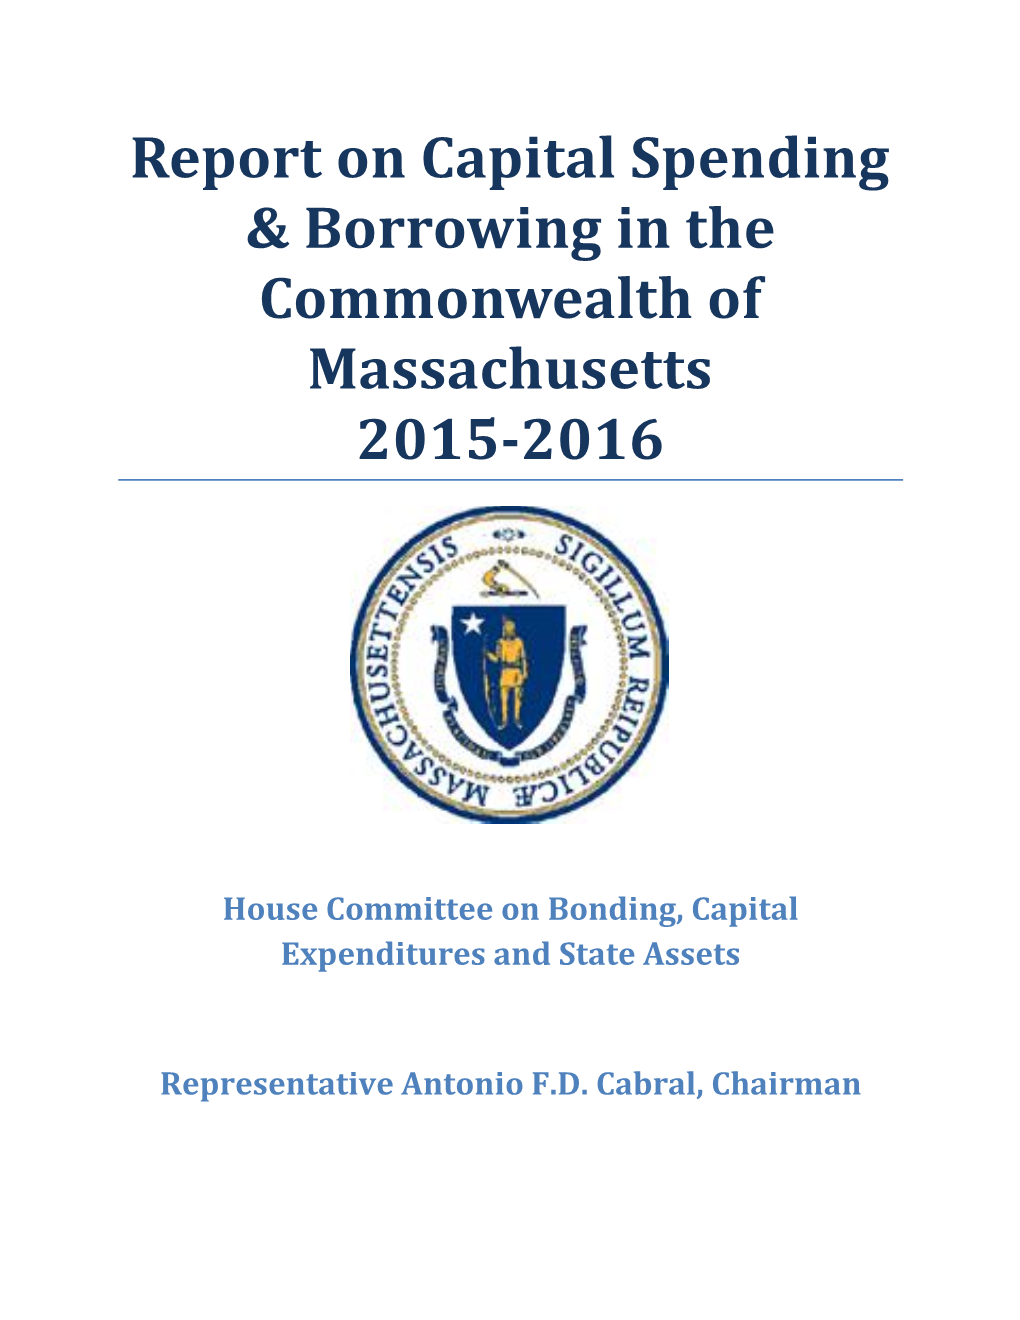 Report on Capital Spending & Borrowing in the Commonwealth Of